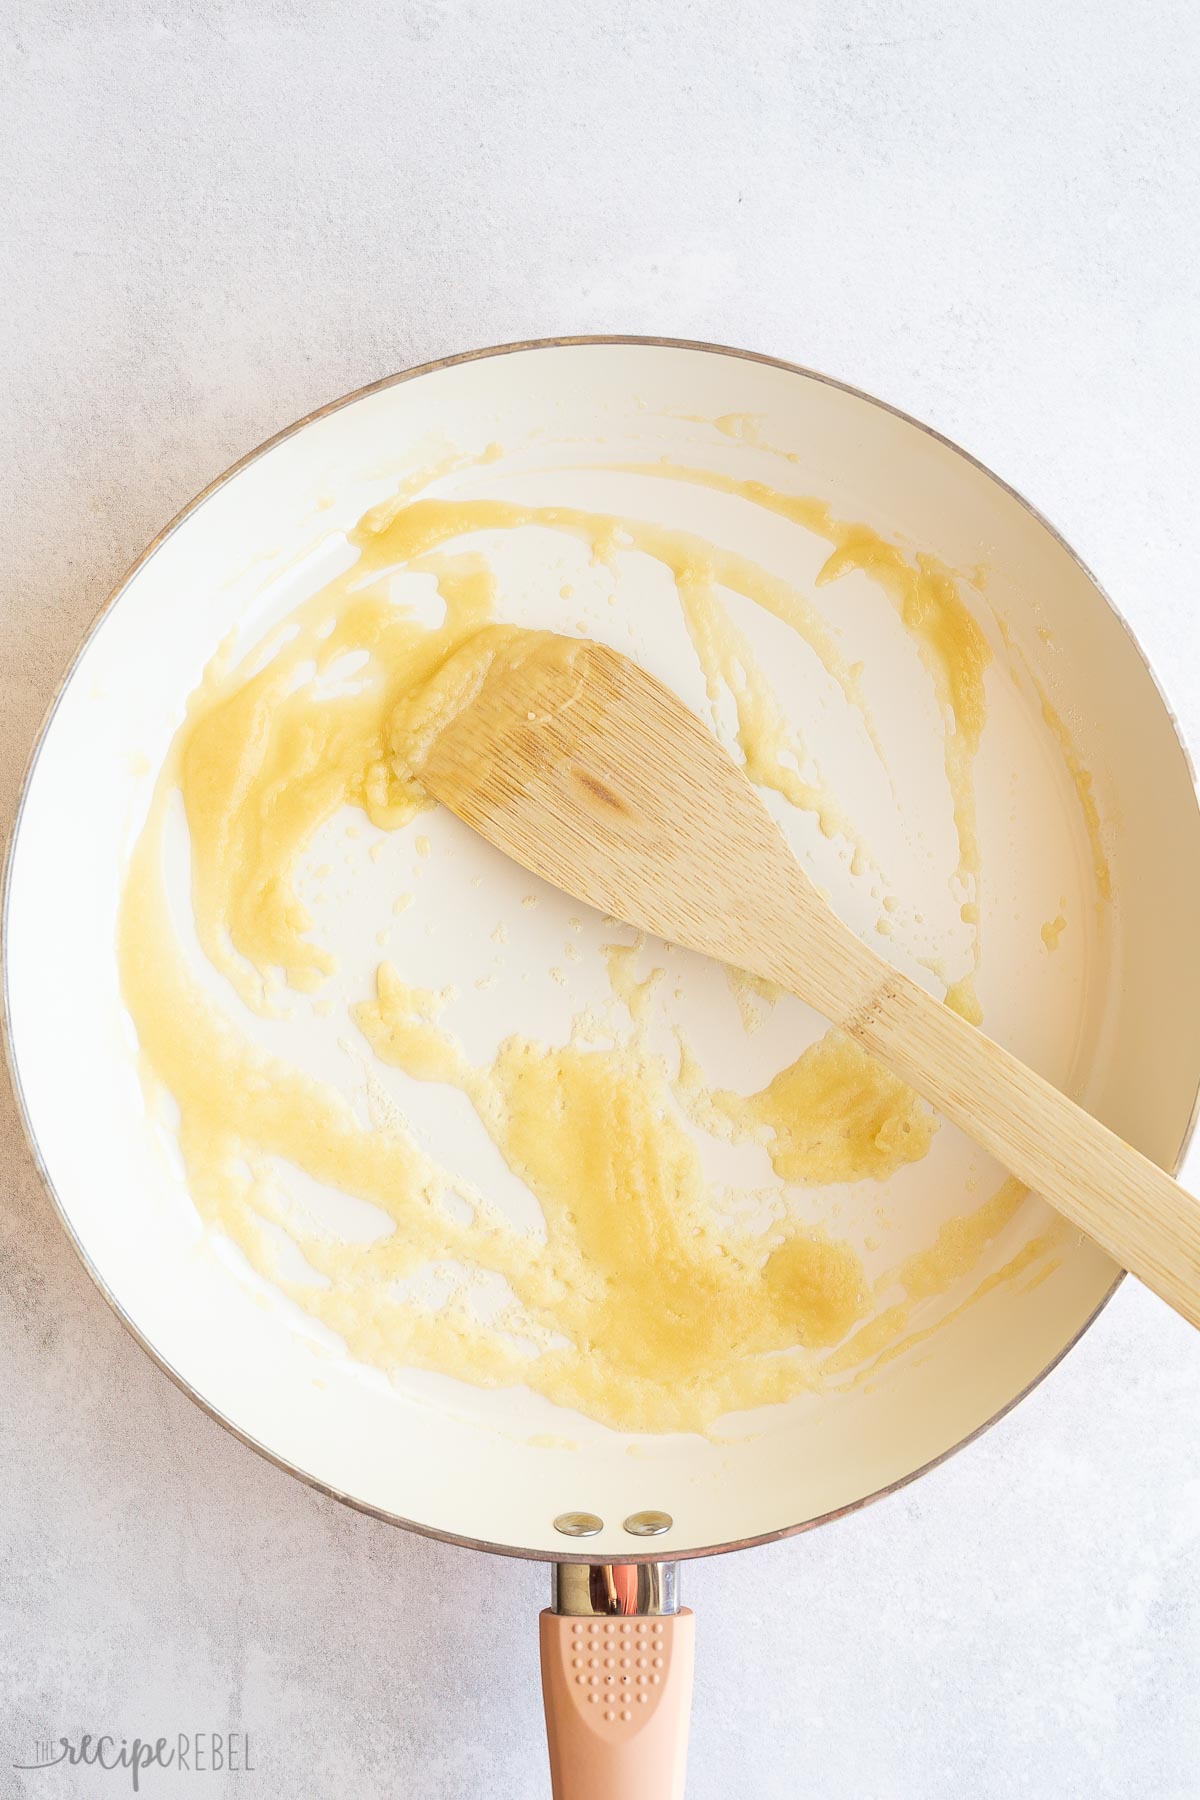 butter melted with flour added to make a roux